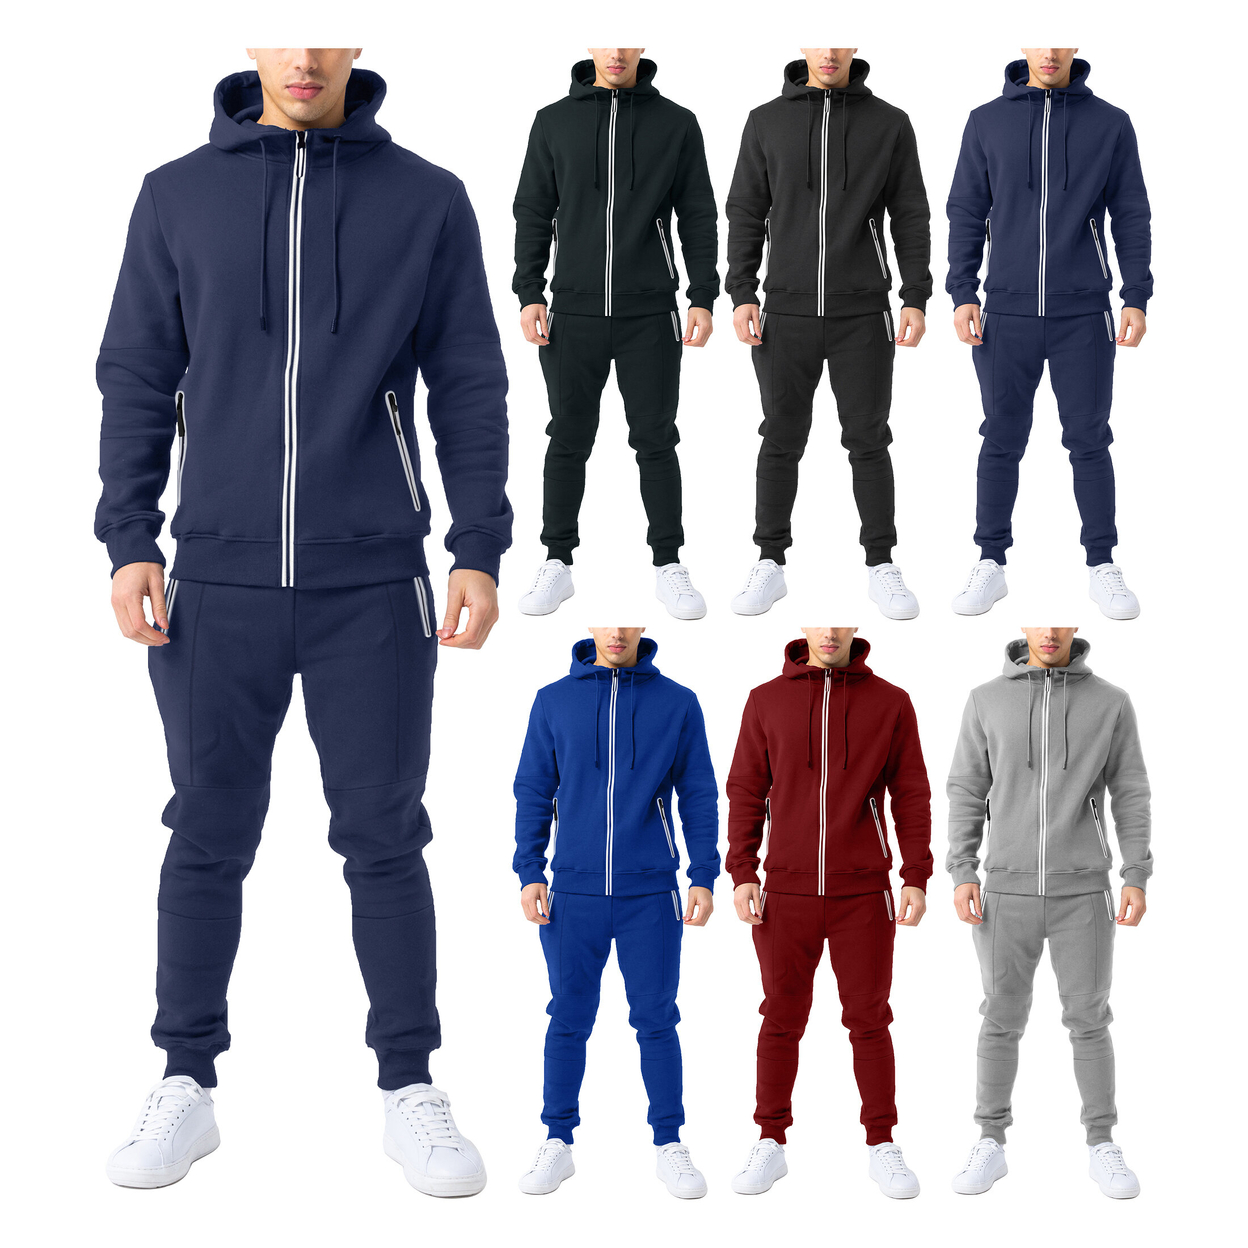 2-Pack: Men's Cozy Slim Fit Active Athletic Full Zip Hoodie And Jogger Tracksuit - Blue & Blue, Xx-large